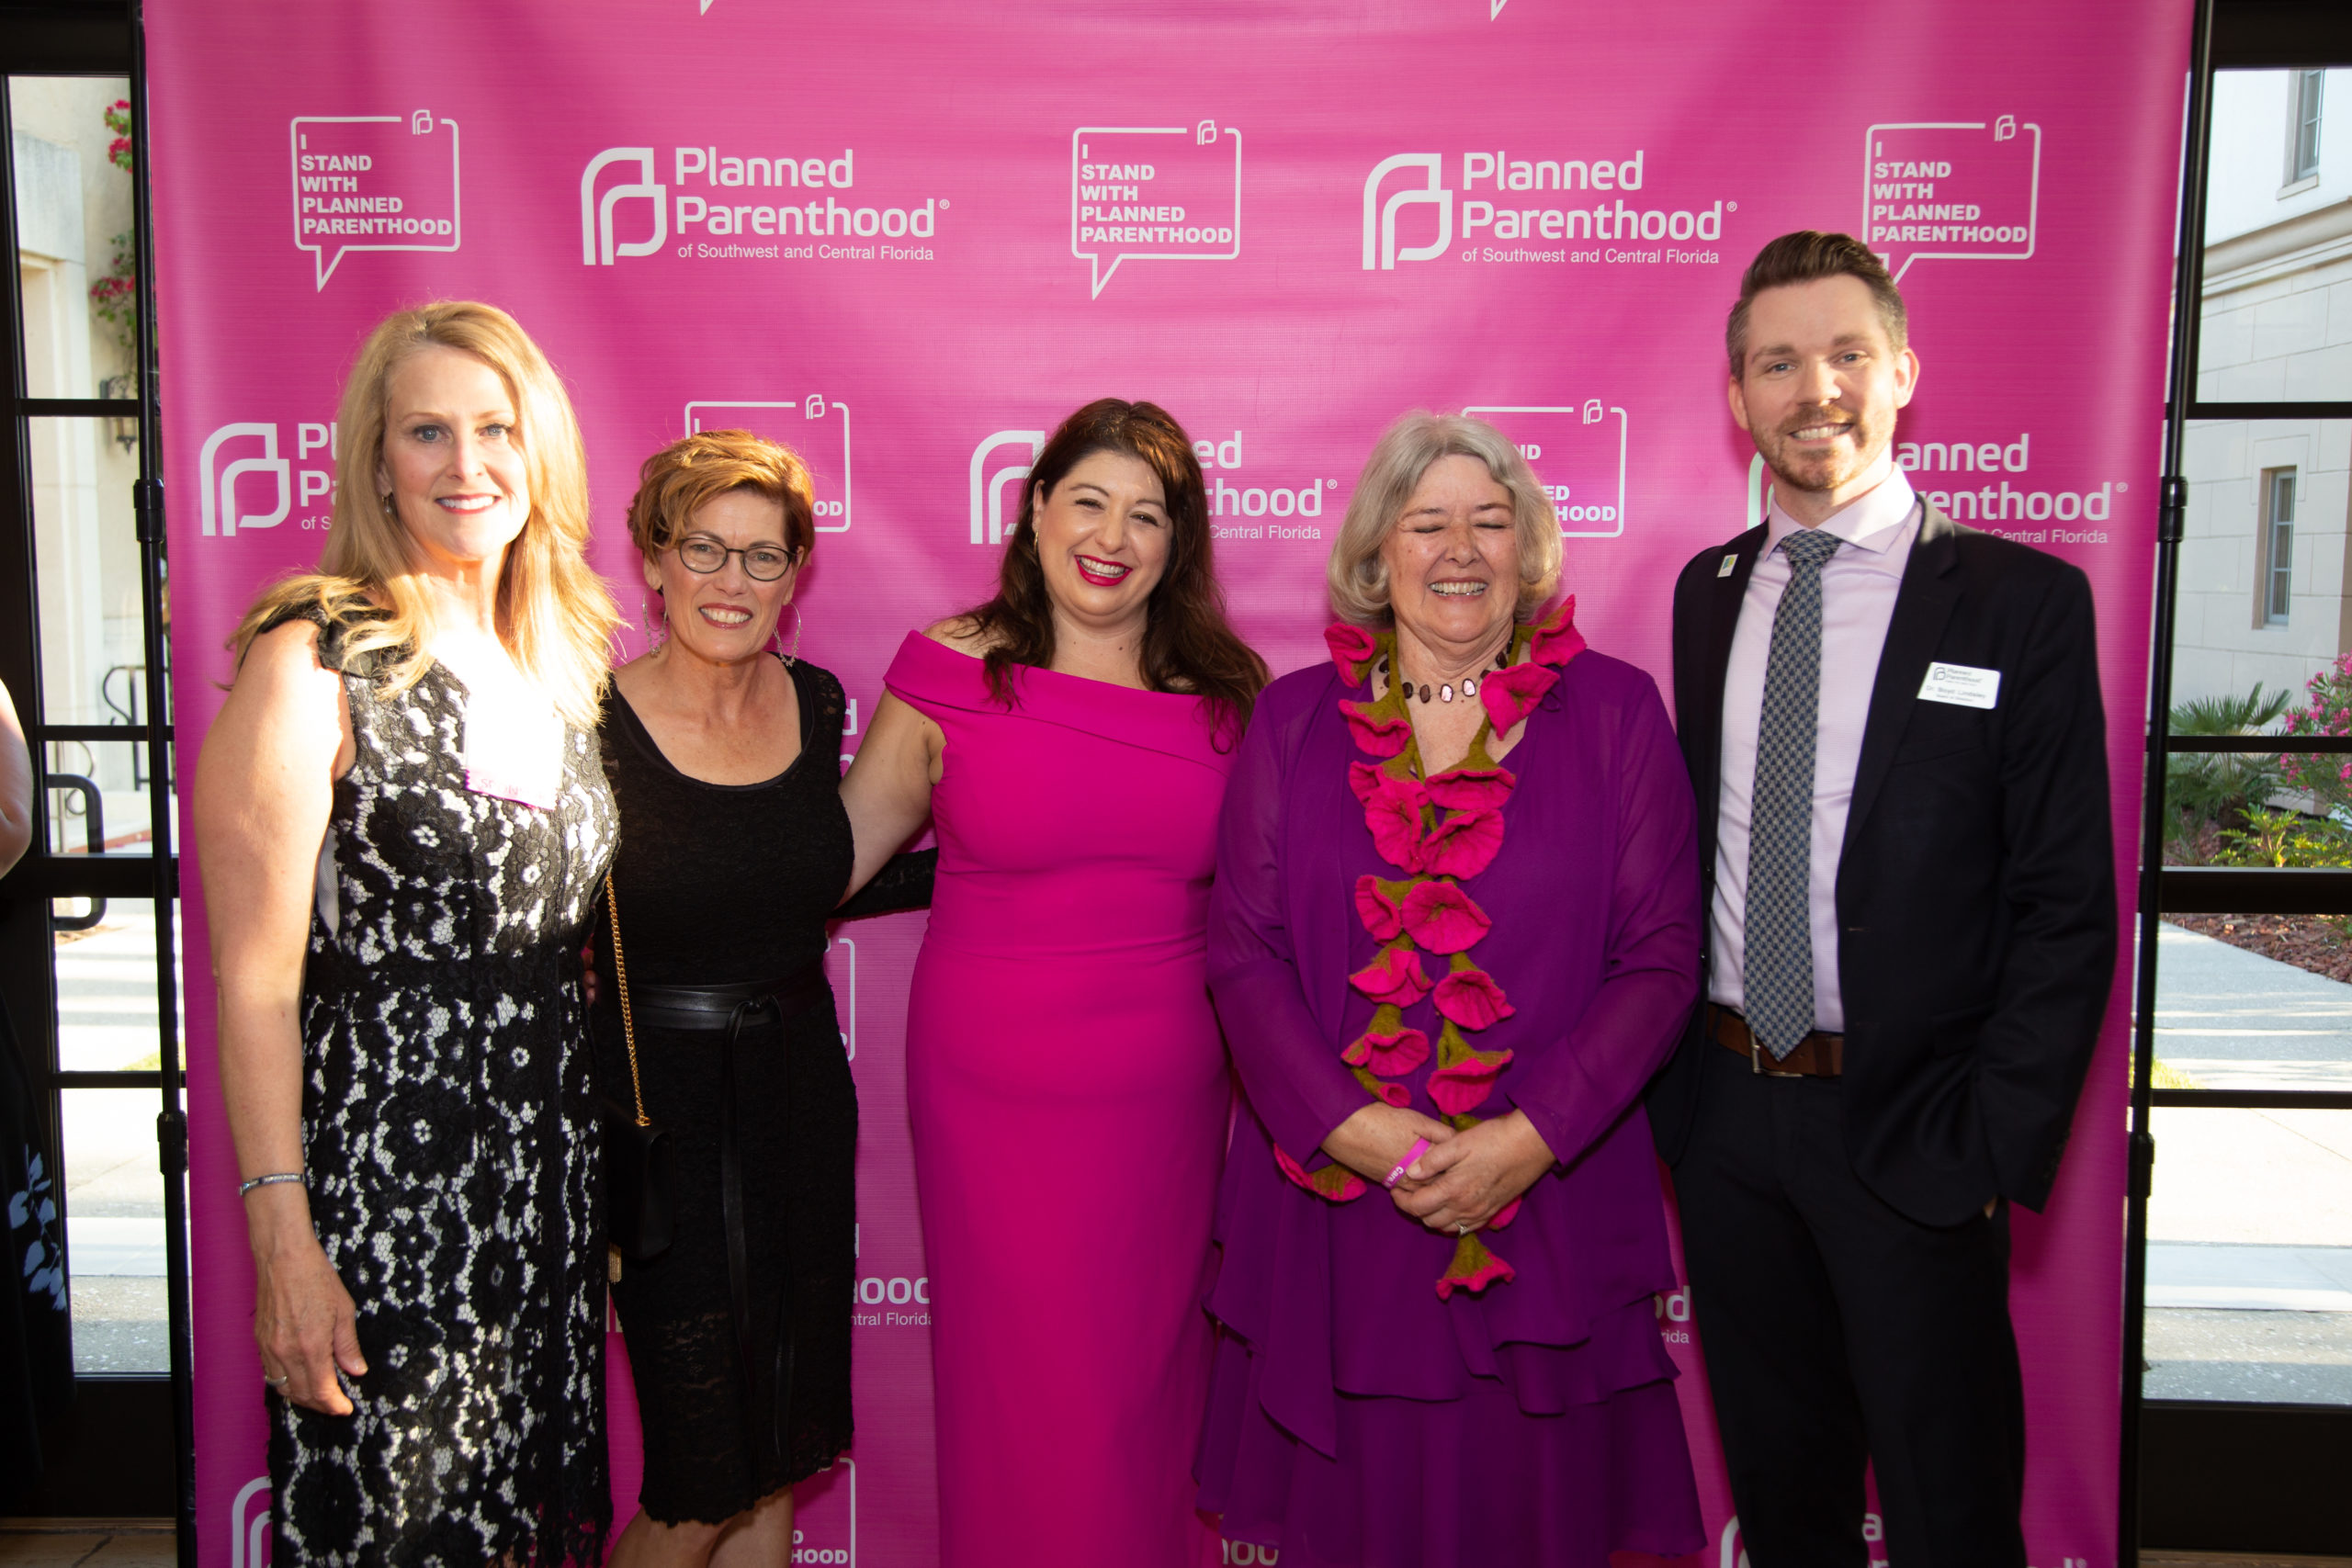 Photo op for Planned Parenthood fundraiser featuring Pat Schroeder